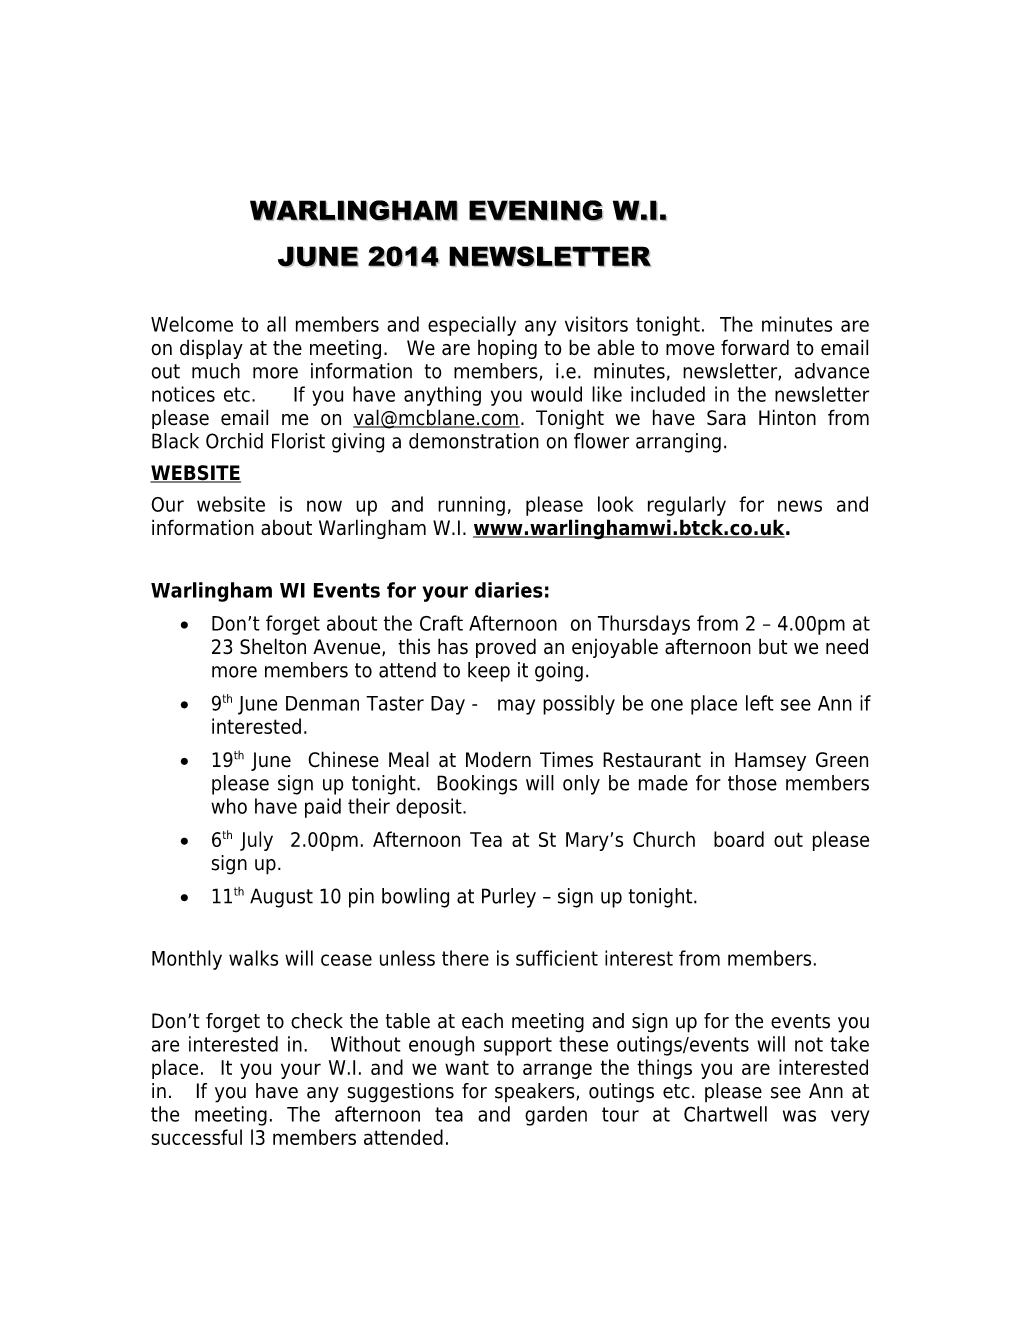 Warlingham WI Events for Your Diaries